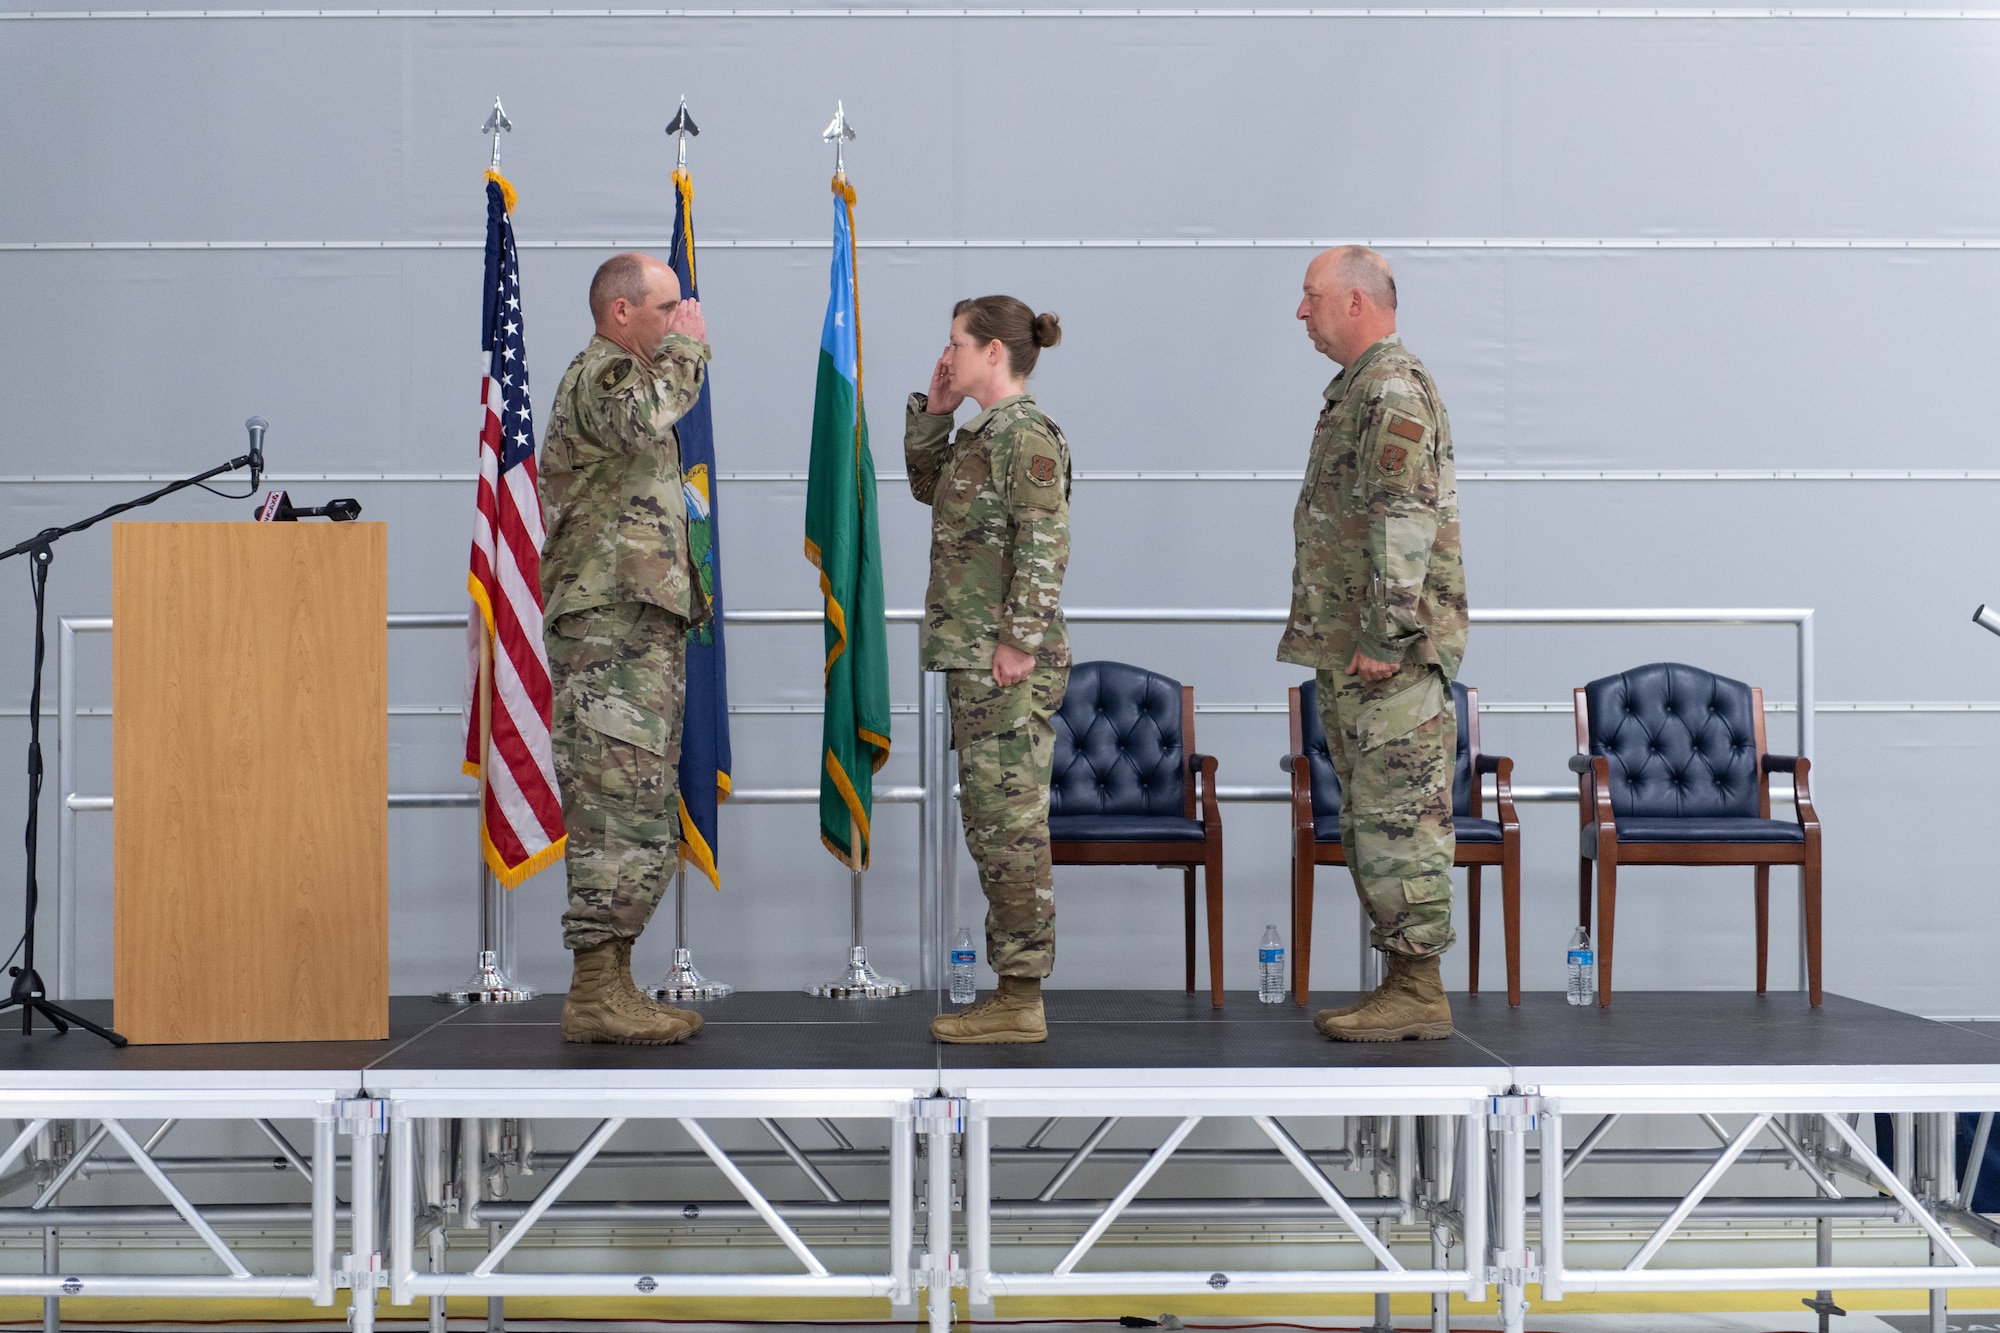 A photo of Chief Master Sgt. Adrianne Schulz, the incoming command chief for the 158th Fighter Wing, assumes authority as command chief from Col. David Shevchik, commander of the 158th Fighter Wing during the command chief master sergeant assumption of authority ceremony at the Vermont Air National Guard Base, South Burlington, Vermont, June 4, 2022. Schulz is the first female command chief in the seven decade history of the Vermont Air National Guard. (U.S. Air National Guard photo by Master Sgt. Ryan Campbell)